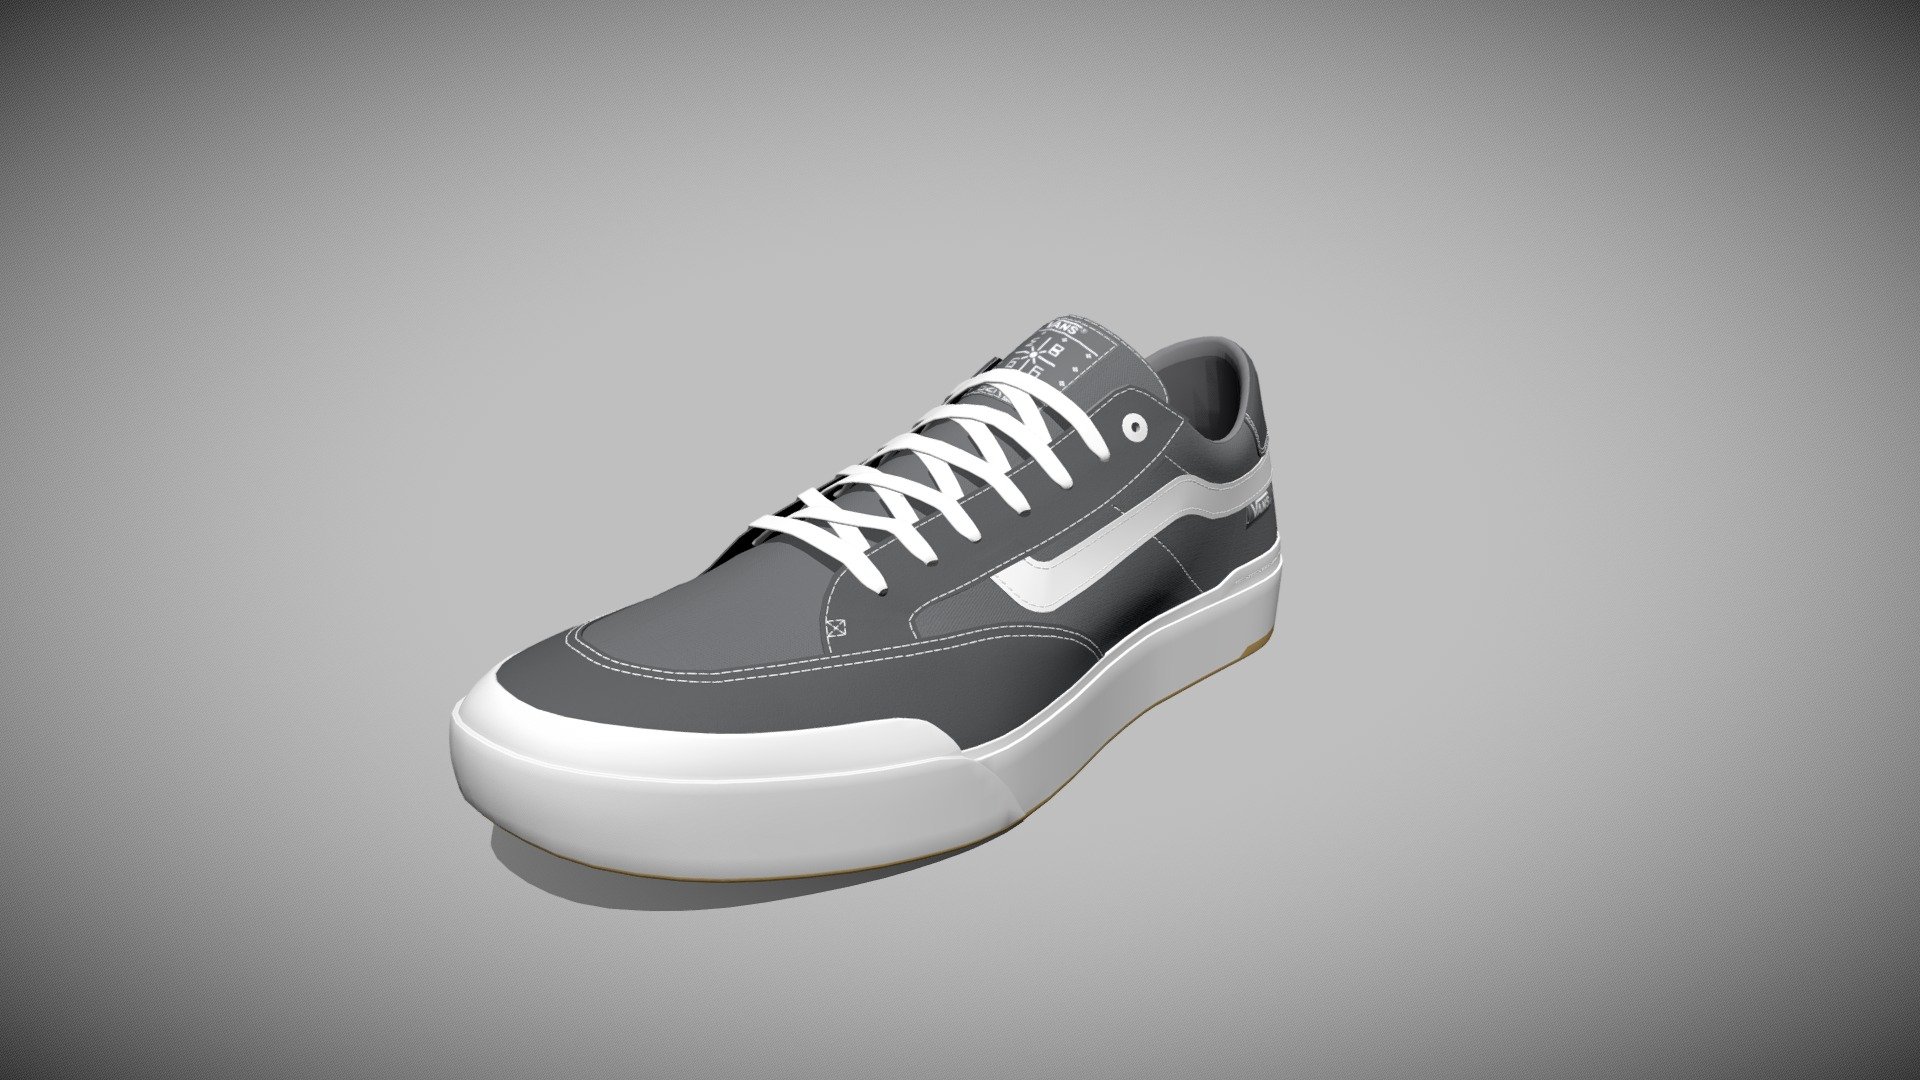 Detailed 3D model of a pair of vans berle pro shoes, modeled in Cinema 4D. The model was created using approximate real world dimensions.

The model has 128,626 polys and 141,542 vertices.

An additional file has been provided containing the original Cinema 4D project file, textures and other 3d format such as 3ds, fbx, obj and stl. These files contain both the left and right pair of the shoes 3d model